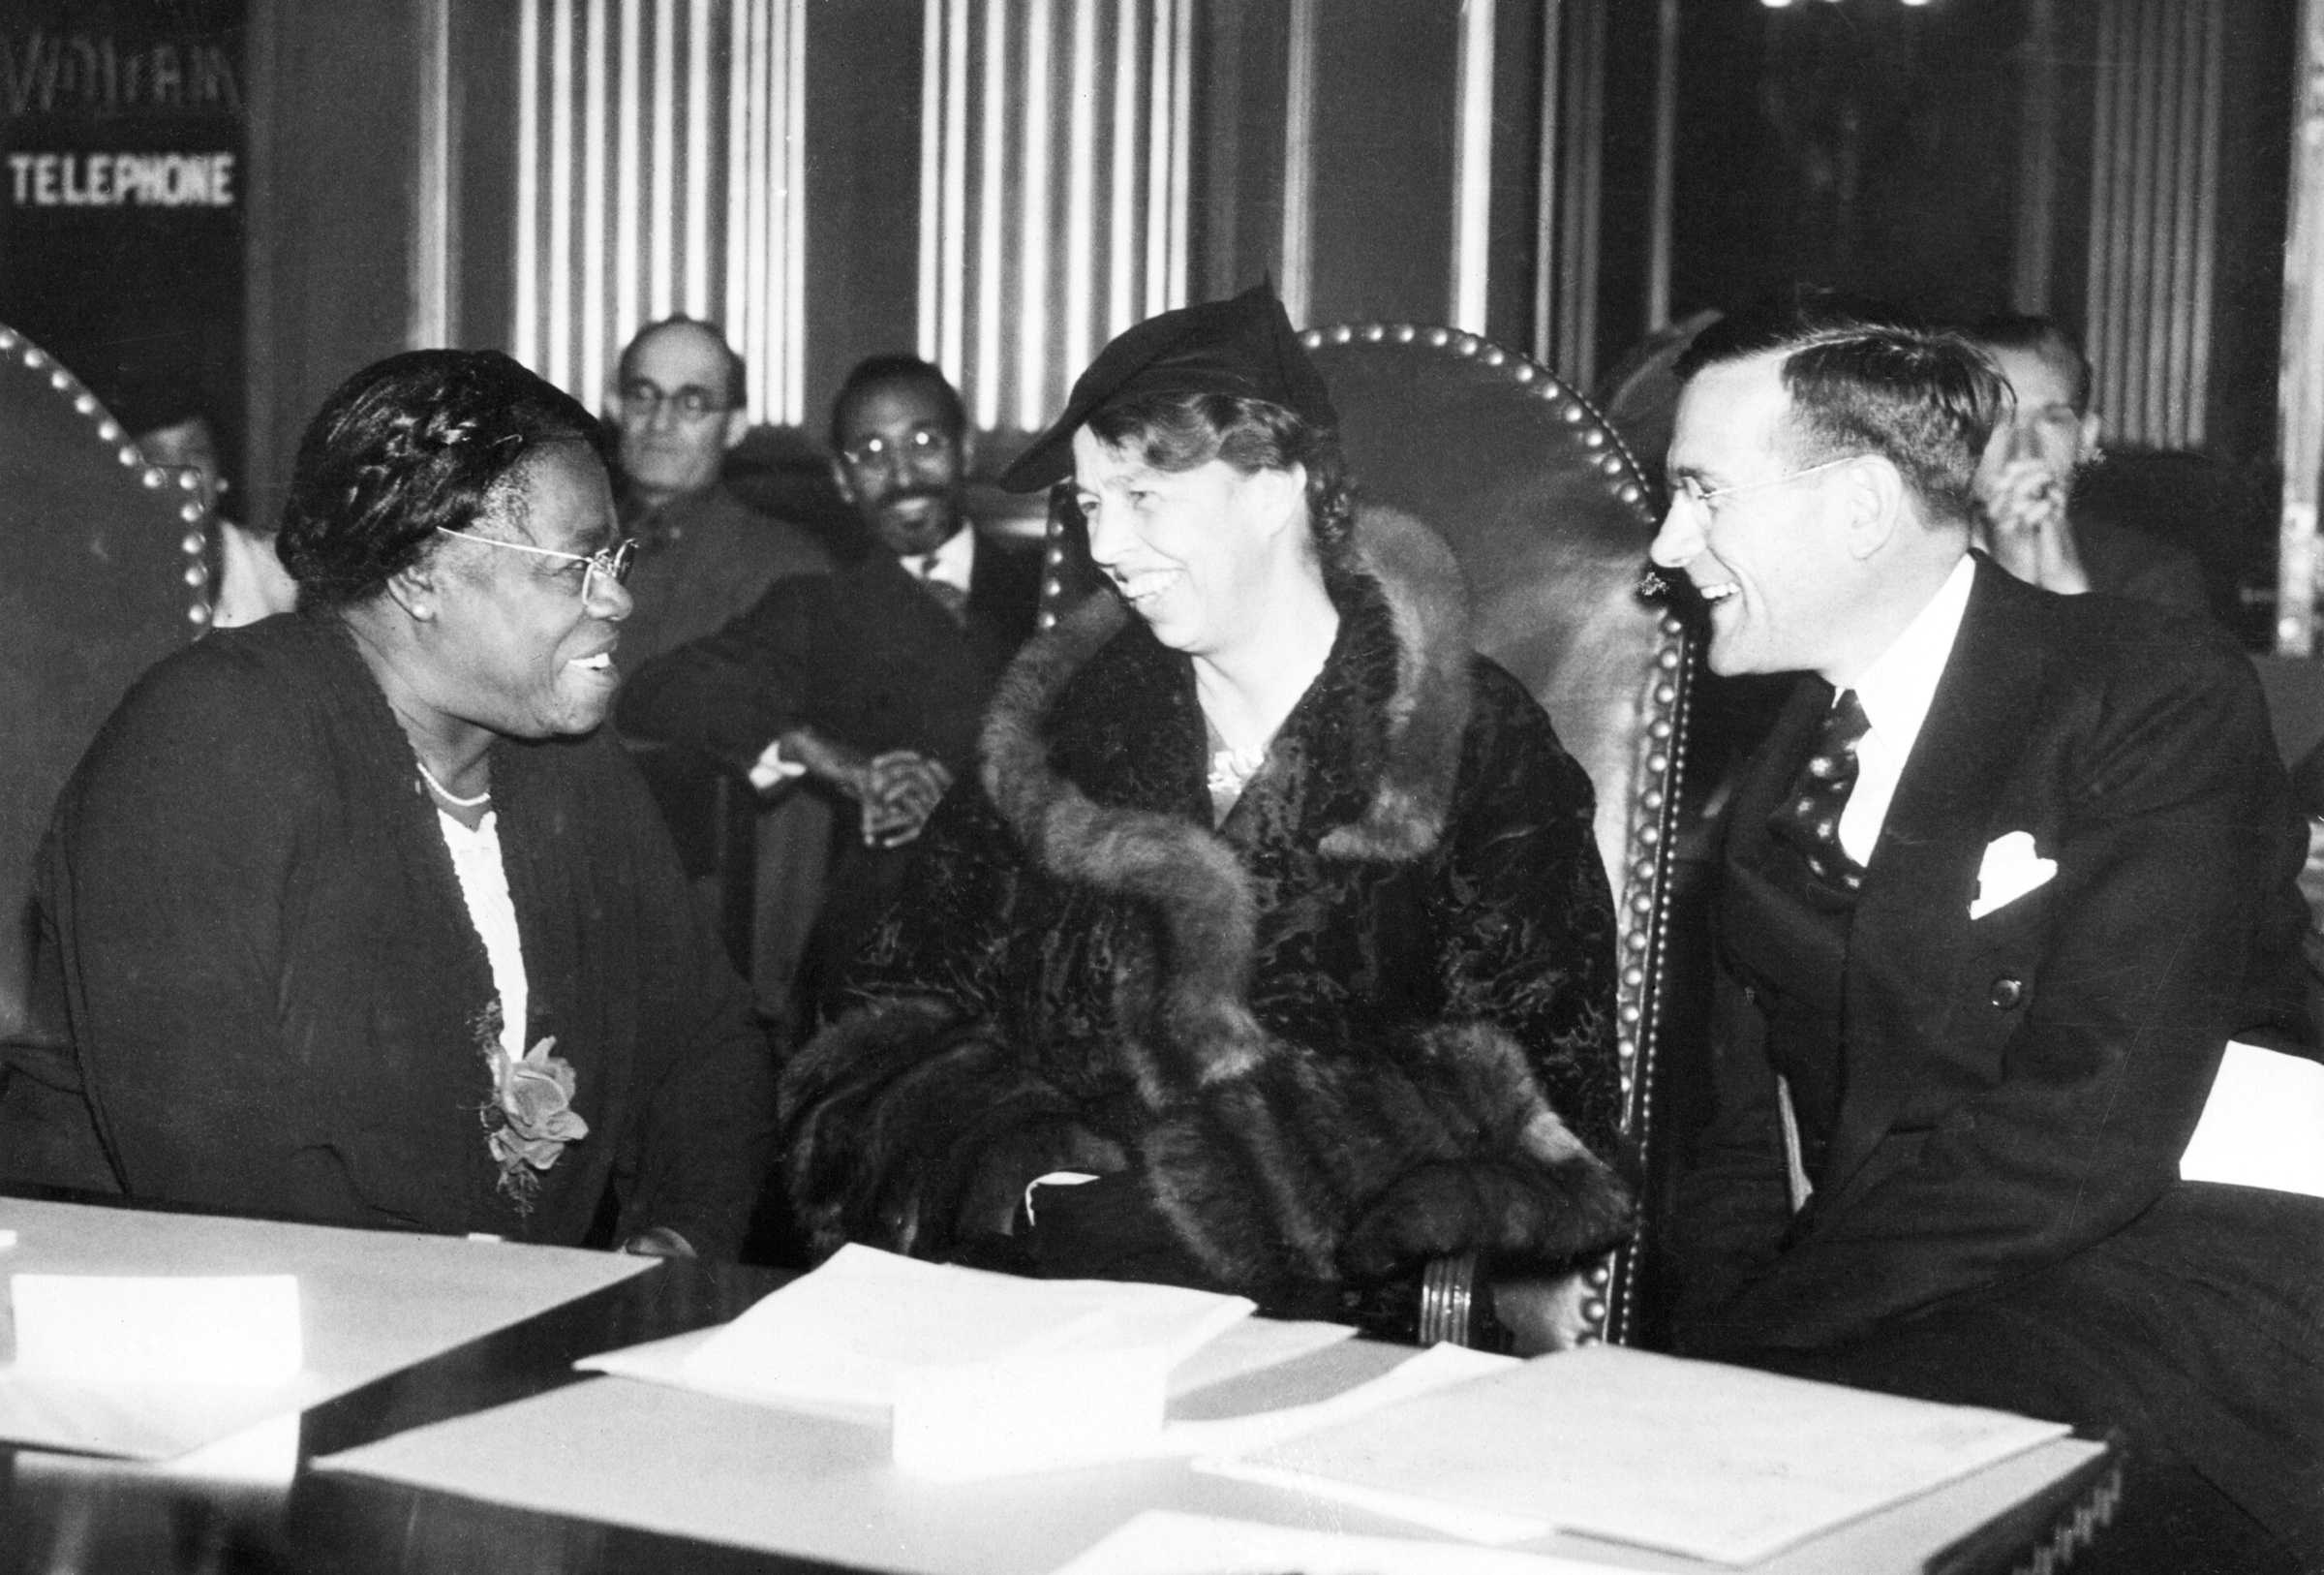 Photograph of Mary McLeod Bethune with First Lady Eleanor Roosevelt and Aubrey Williams